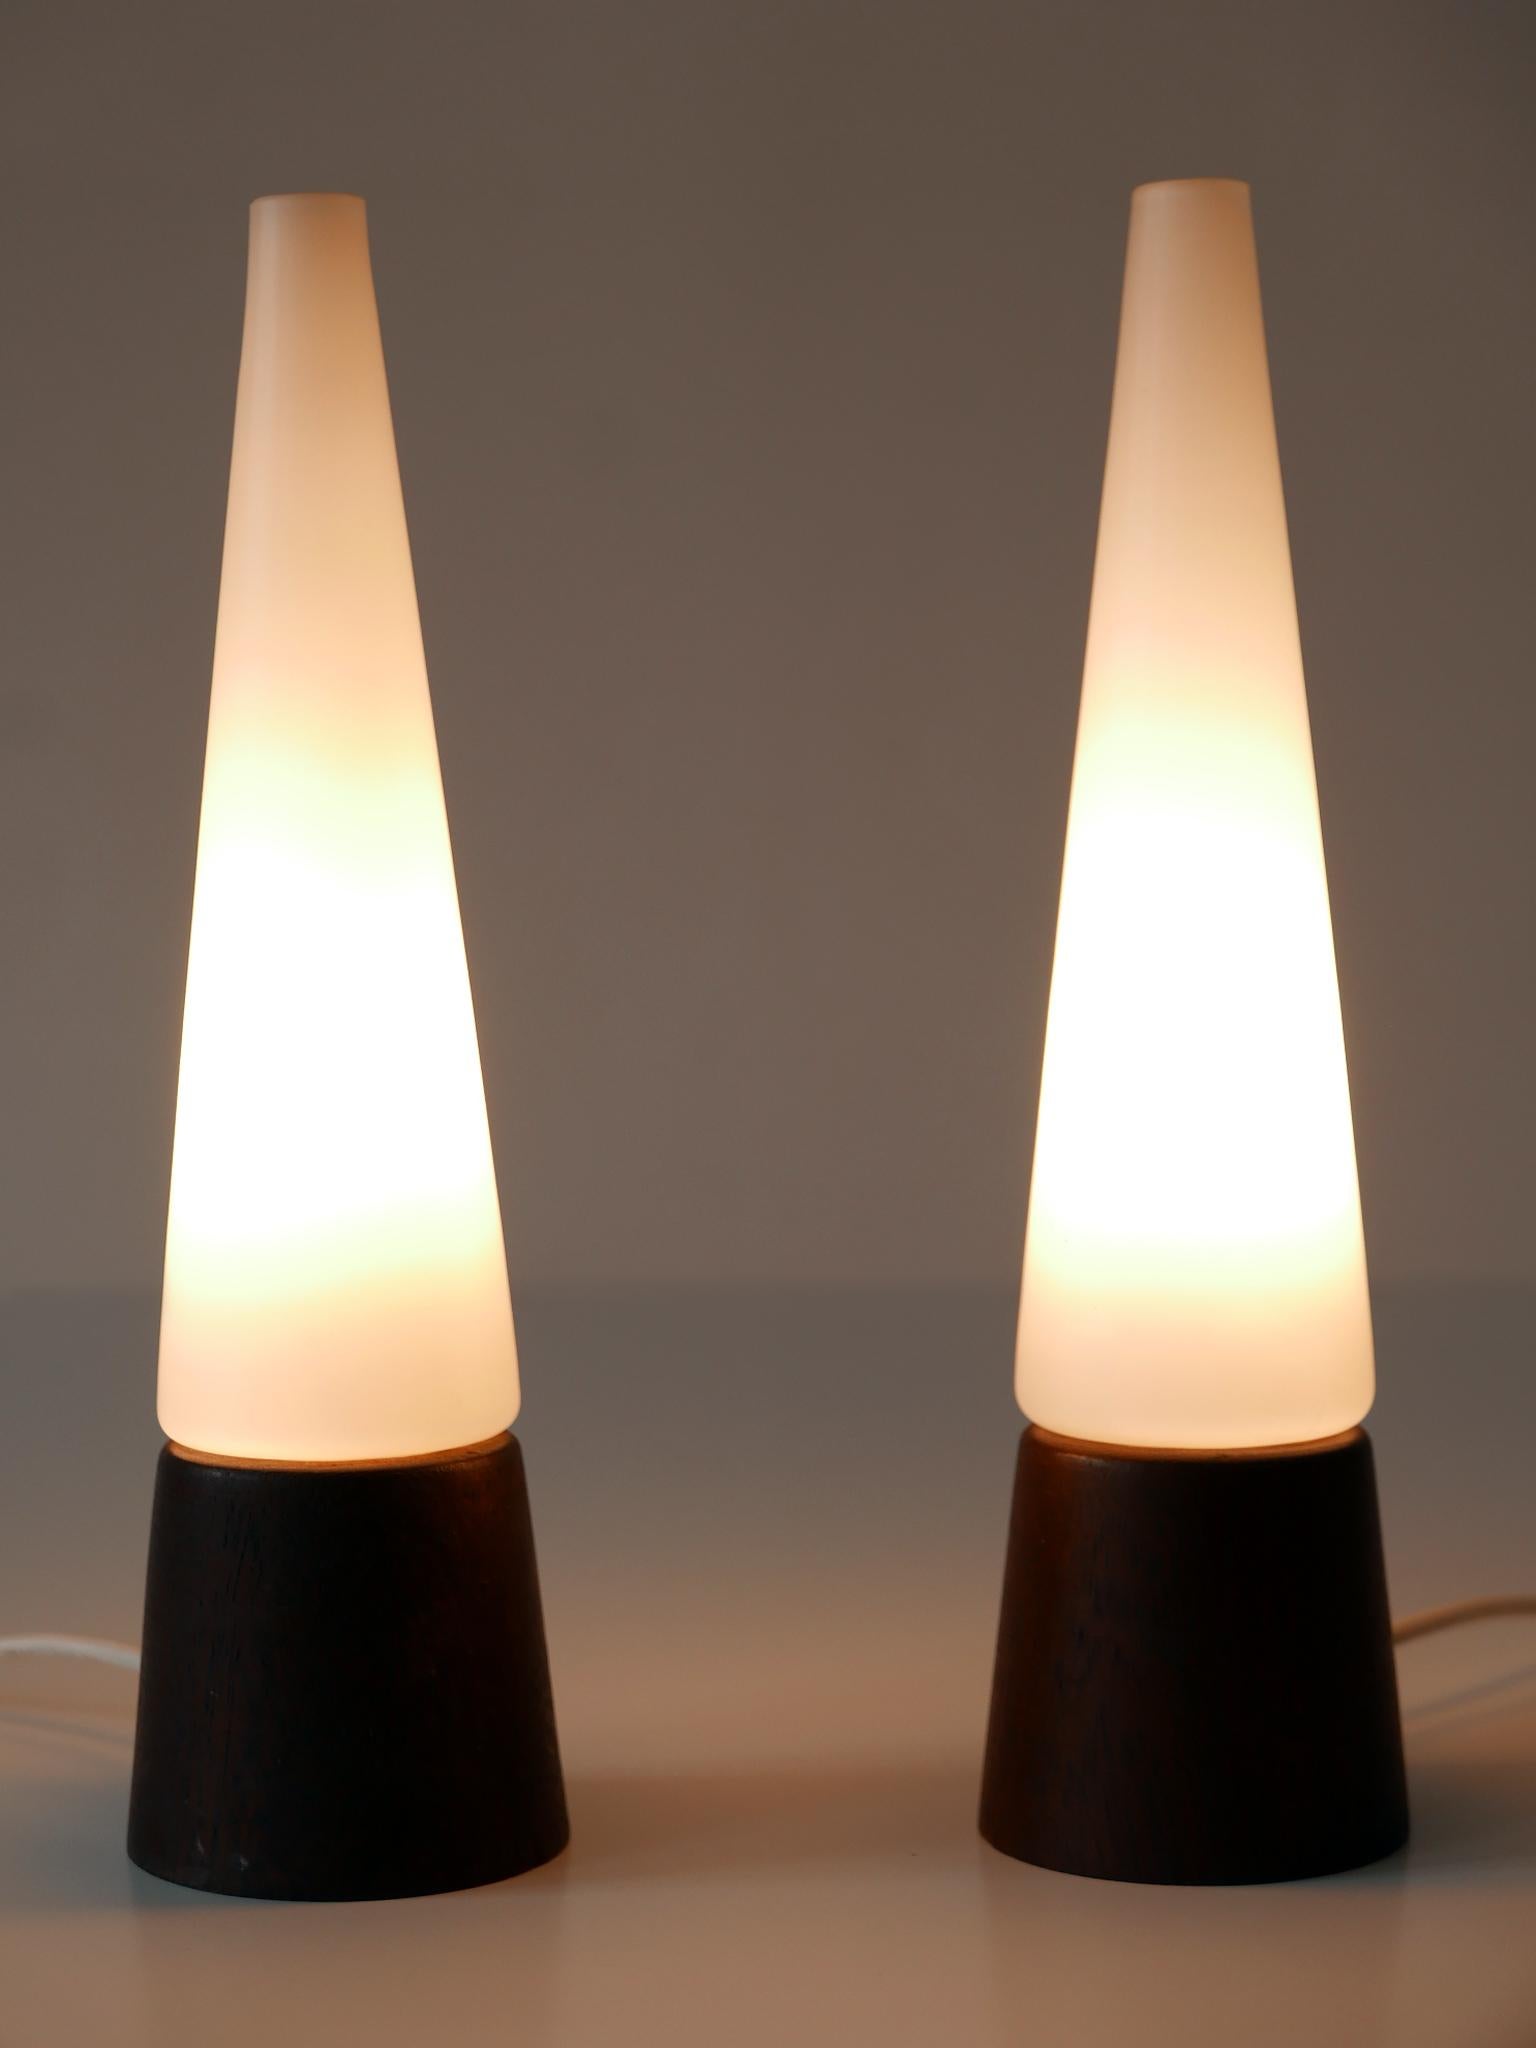 Set of two elegant and highly decorative Mid-Century Modern table lamps. Designed and manufactured in Scandinavia, 1960s.

Executed in opaline glass and teak wood, each lamp comes with 1 x E14 / E12 Edison screw fit bulb socket, is wired, in